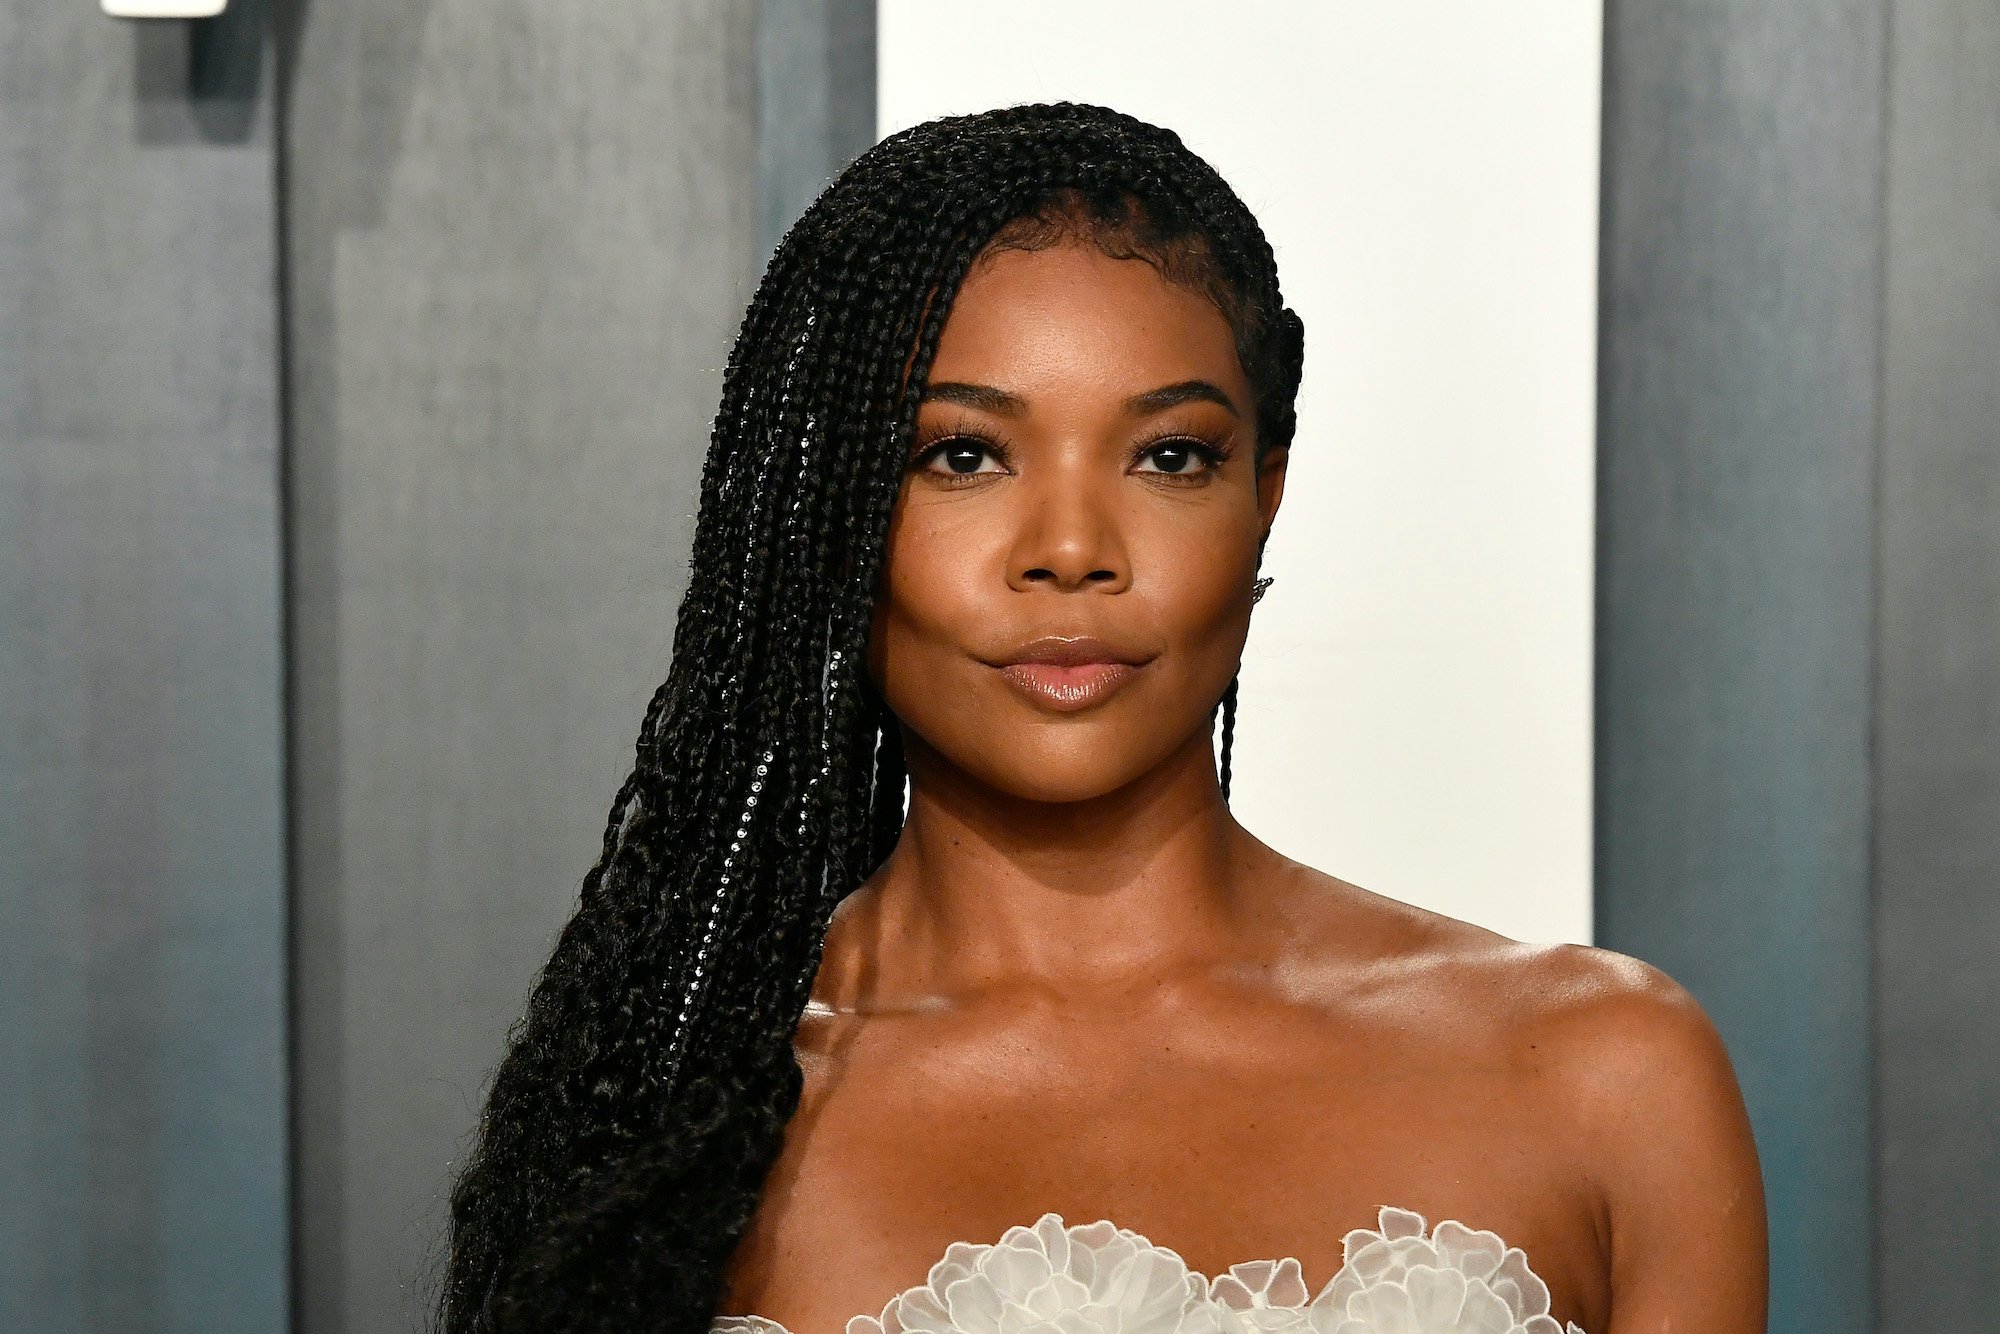 1 of Gabrielle Union’s Earliest Roles Was a Criminal in ‘Sister, Sister’